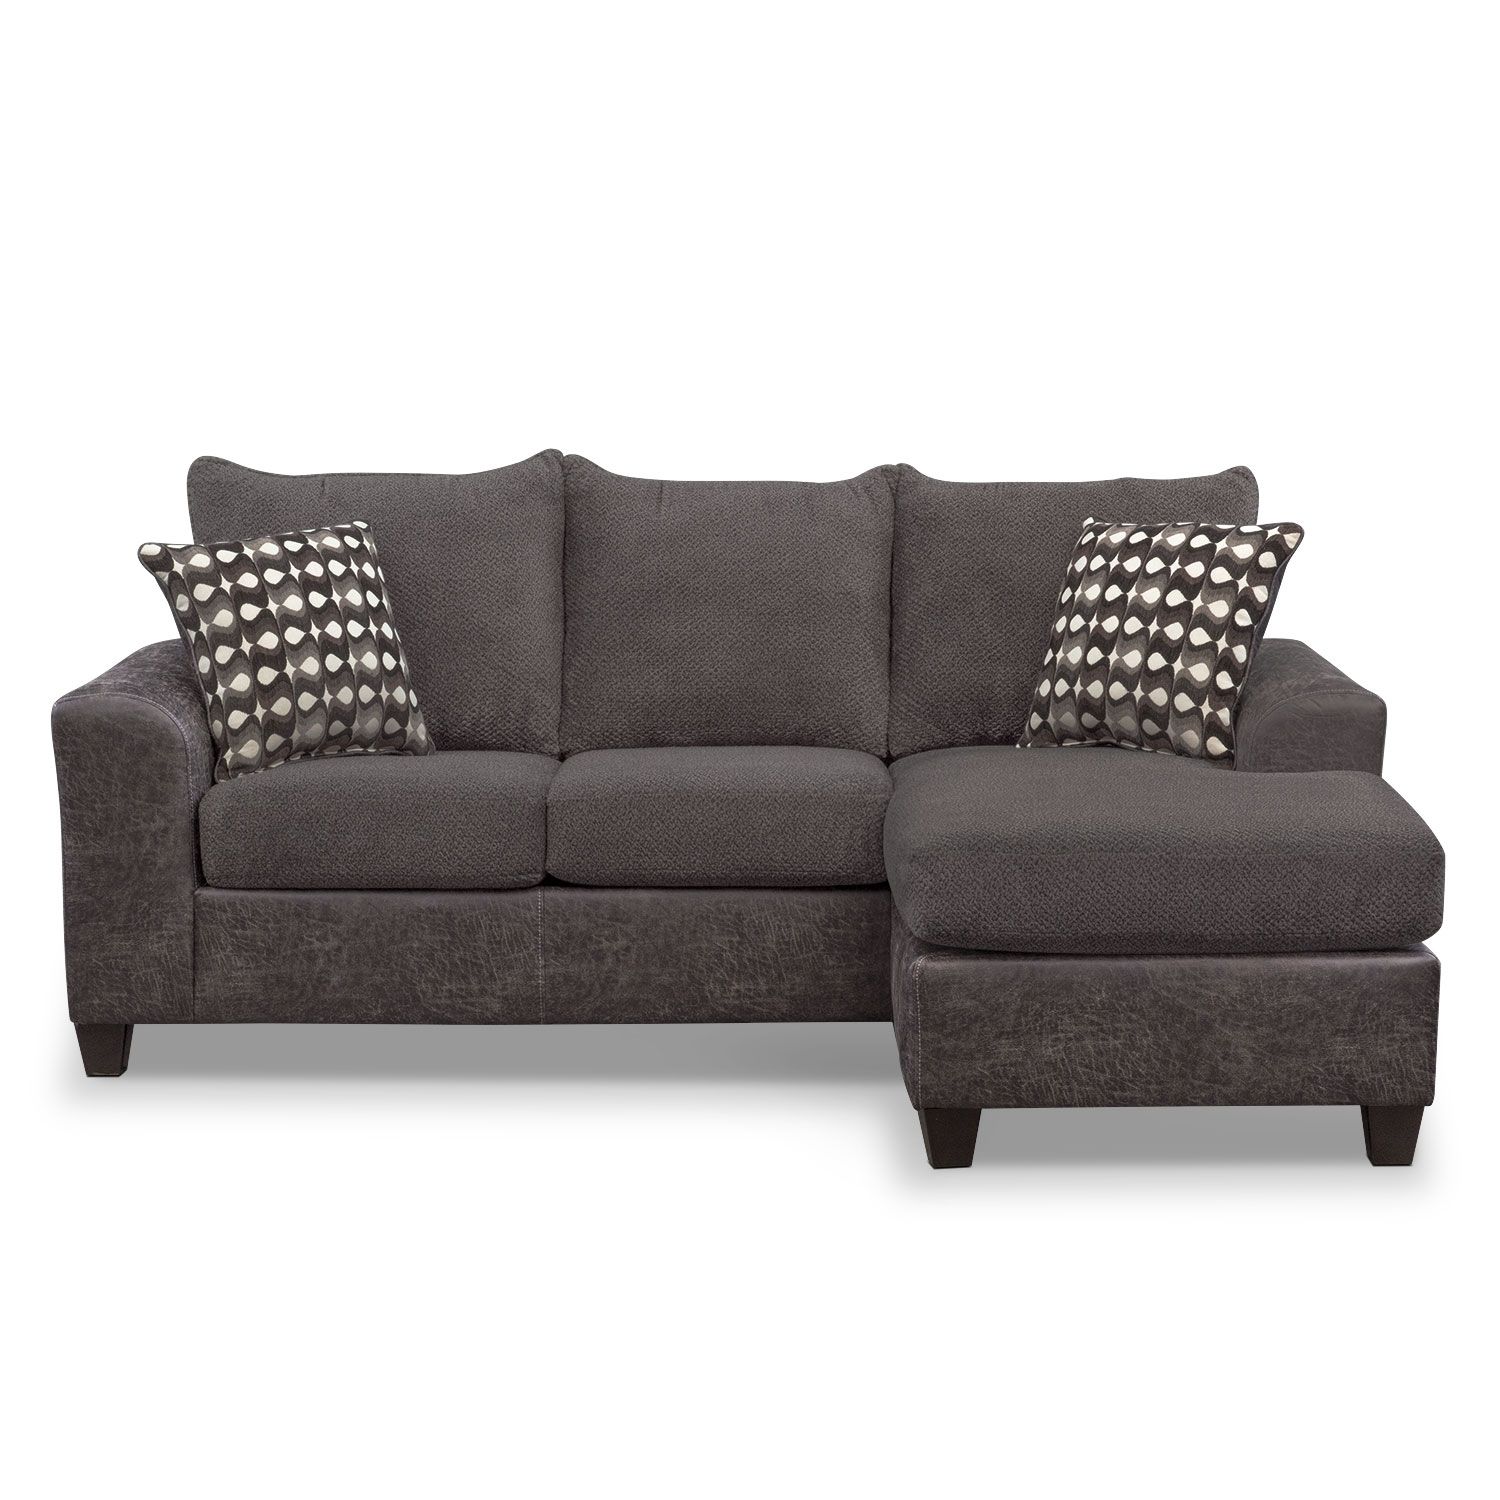 Sofa W Chaise | Home And Textiles In Arrowmask 2 Piece Sectionals With Laf Chaise (View 11 of 30)